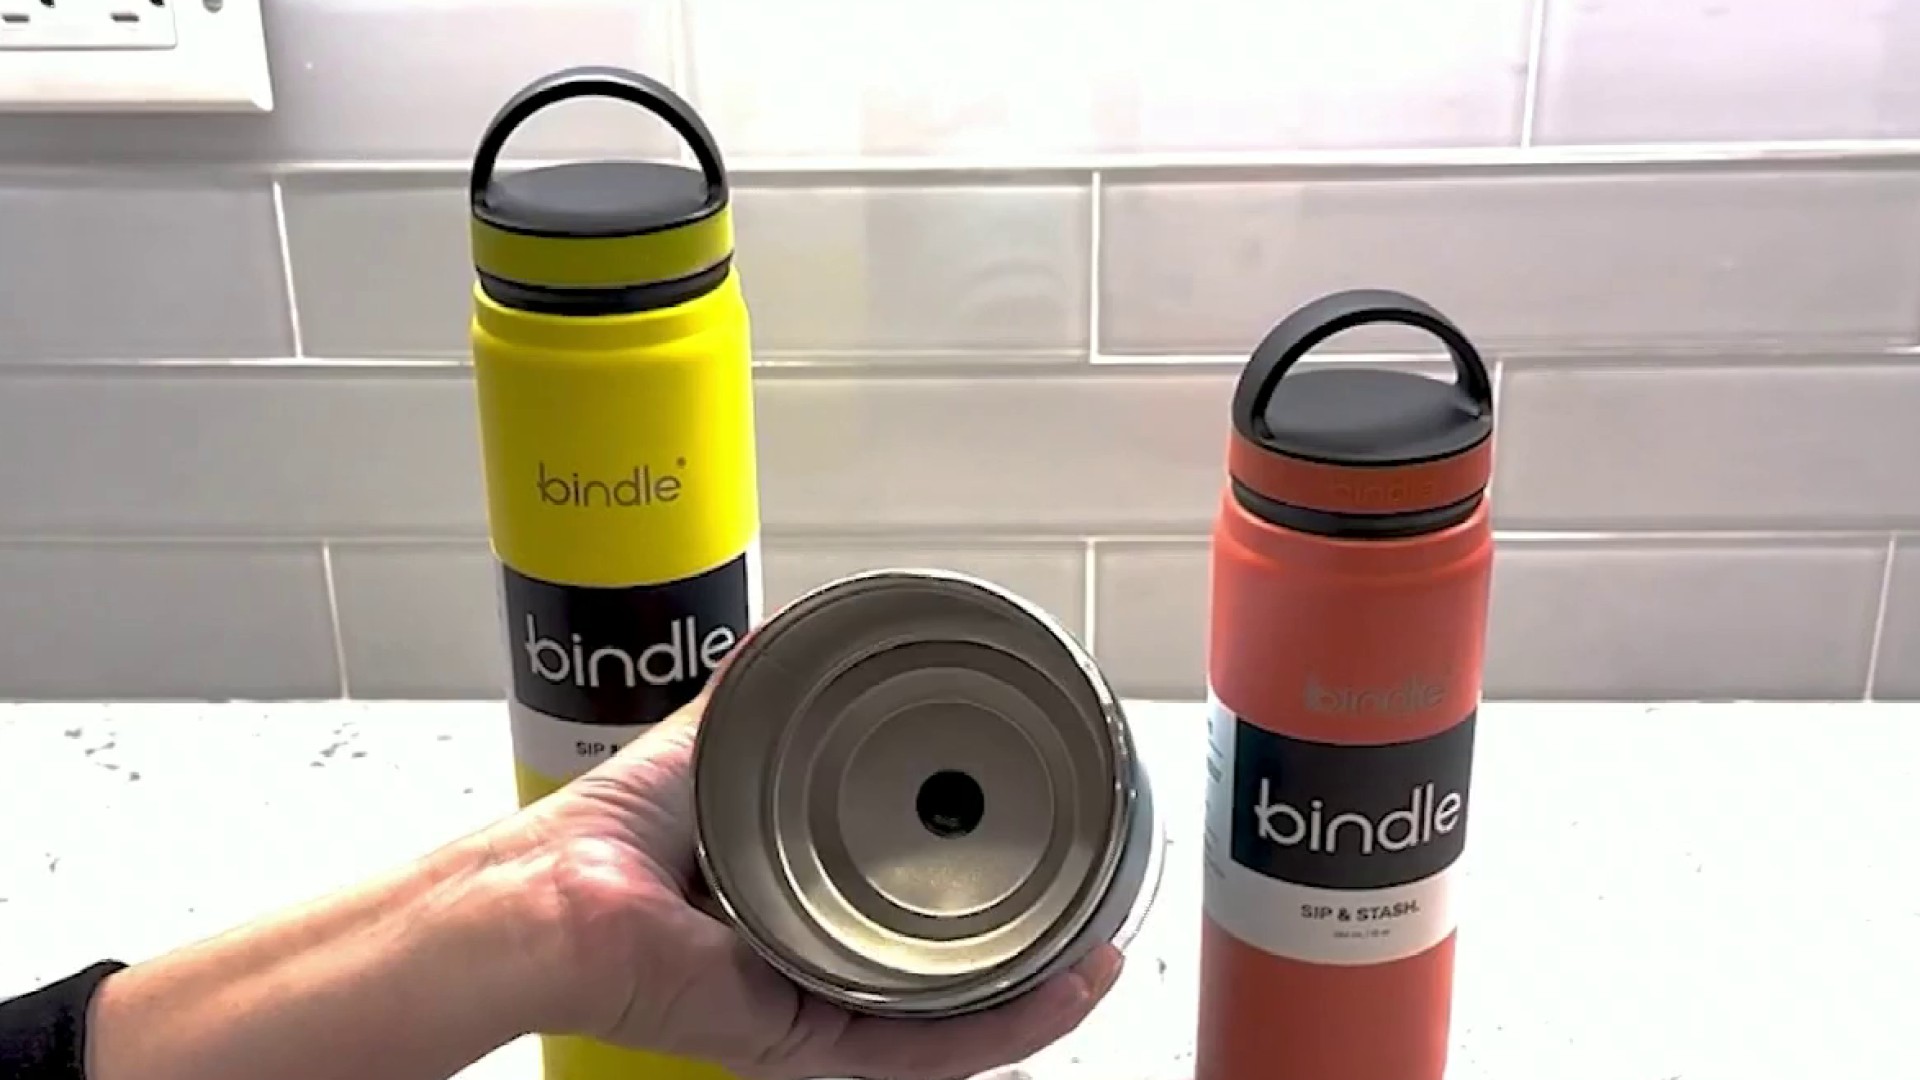 Stainless steel toddler cups, bottles recalled for lead poisoning